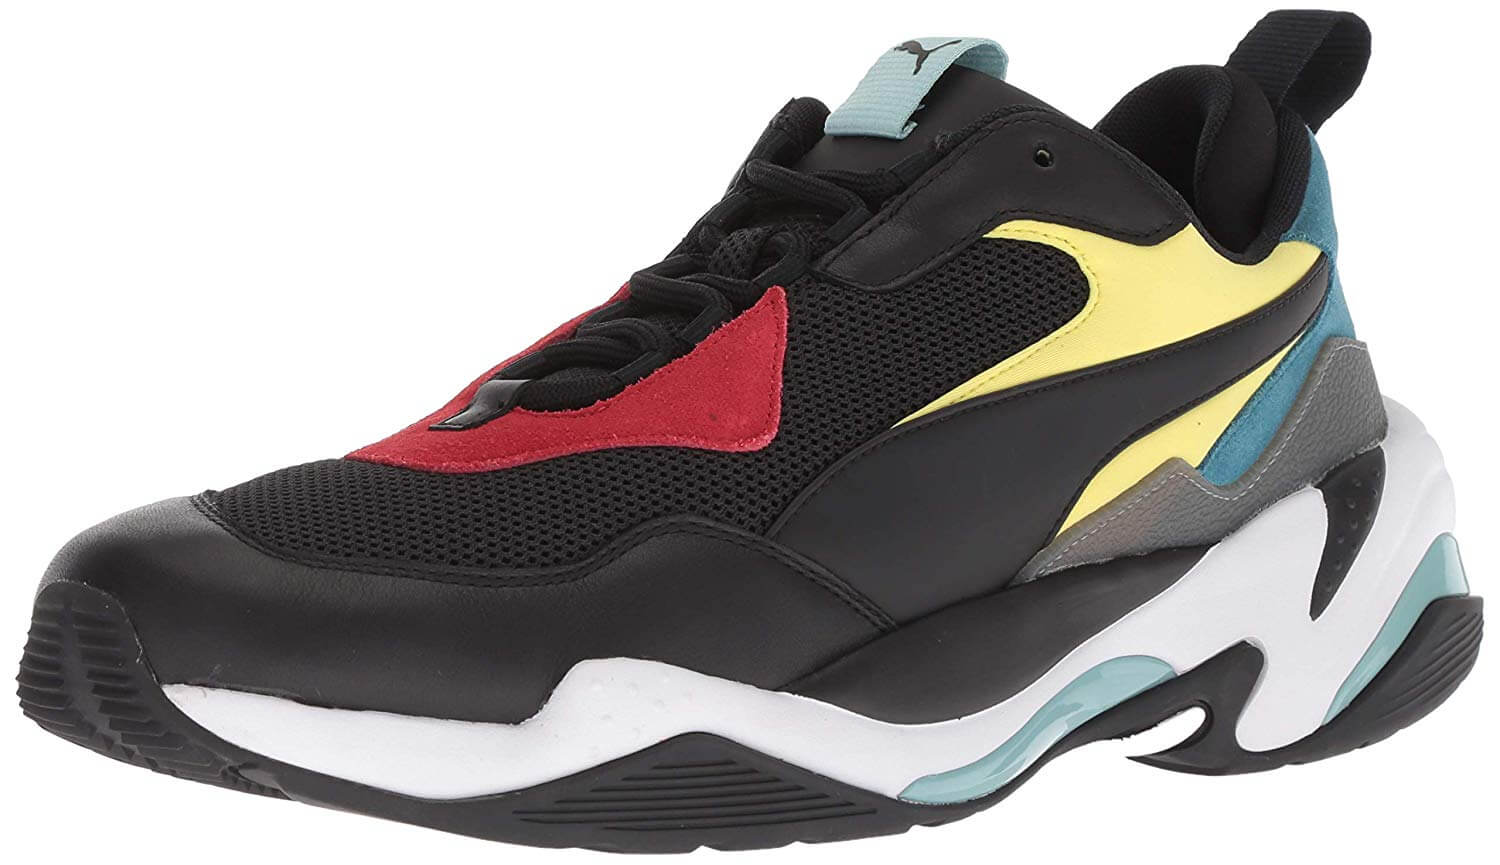 Puma Thunder Spectra Reviewed \u0026 Rated 